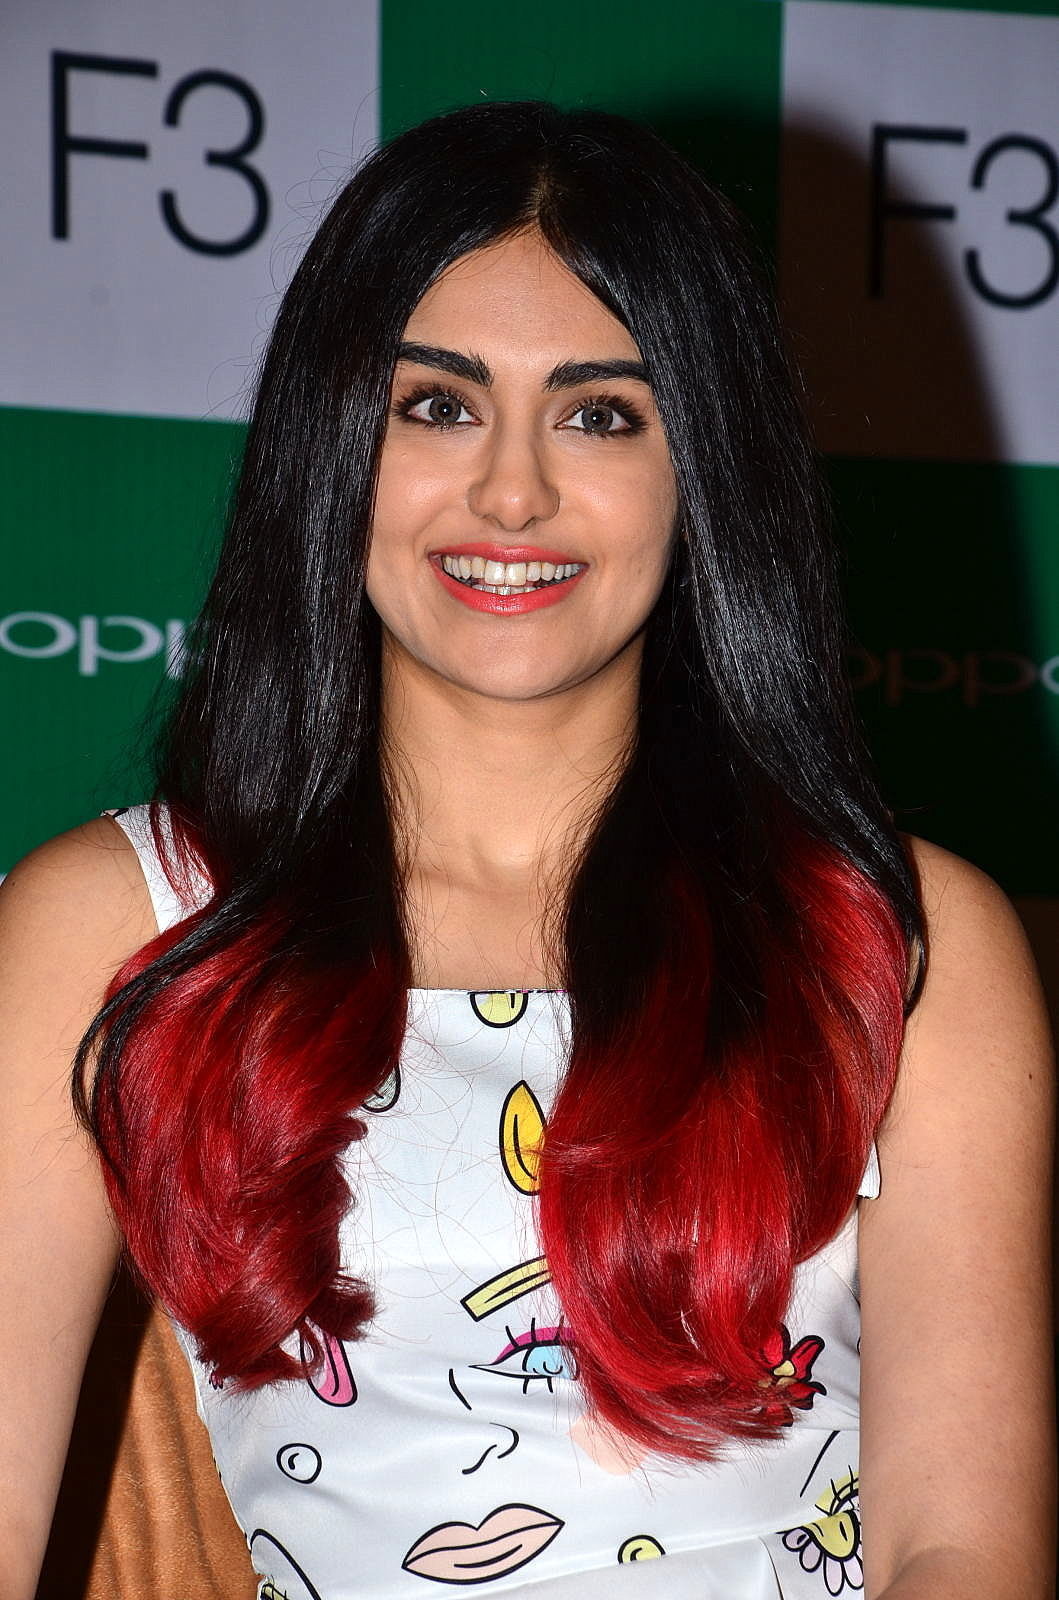 Adah Sharma Launches OPPO F3 Smart Mobile Phone Photos | Picture 1497742